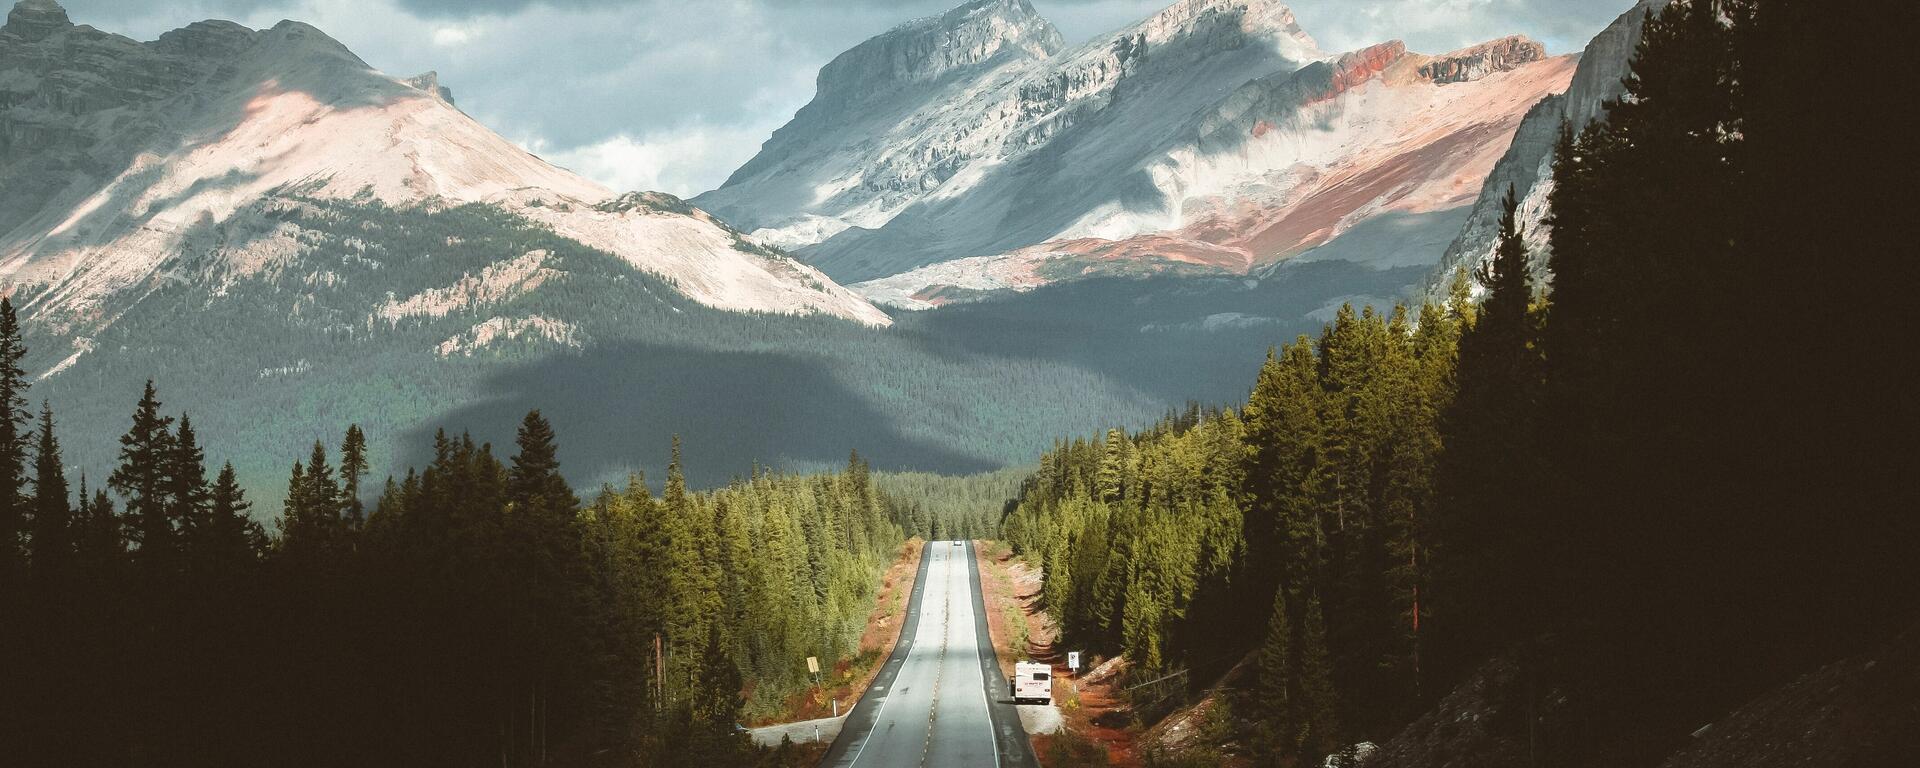 Gray concrete road between green trees and mountains during daytime